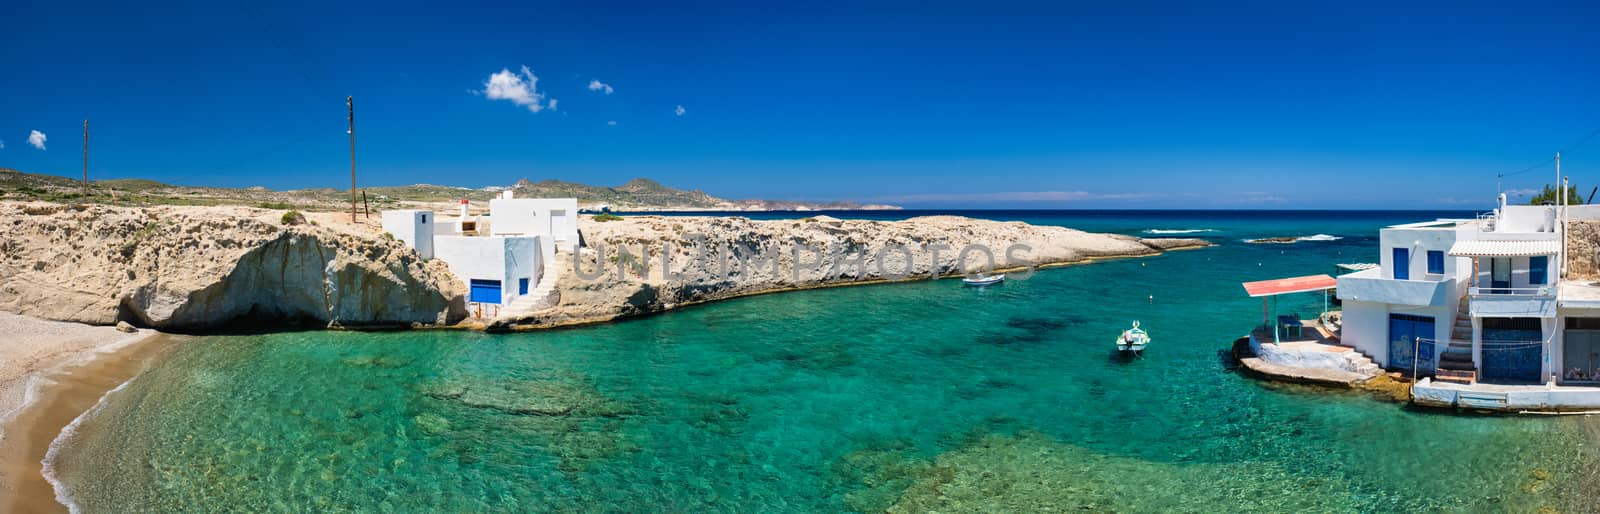 Greece scenic island panorama - small harbor with fishing boats in crystal clear turquoise water, traditishional whitewashed house. MItakas village, Milos island, Greece.